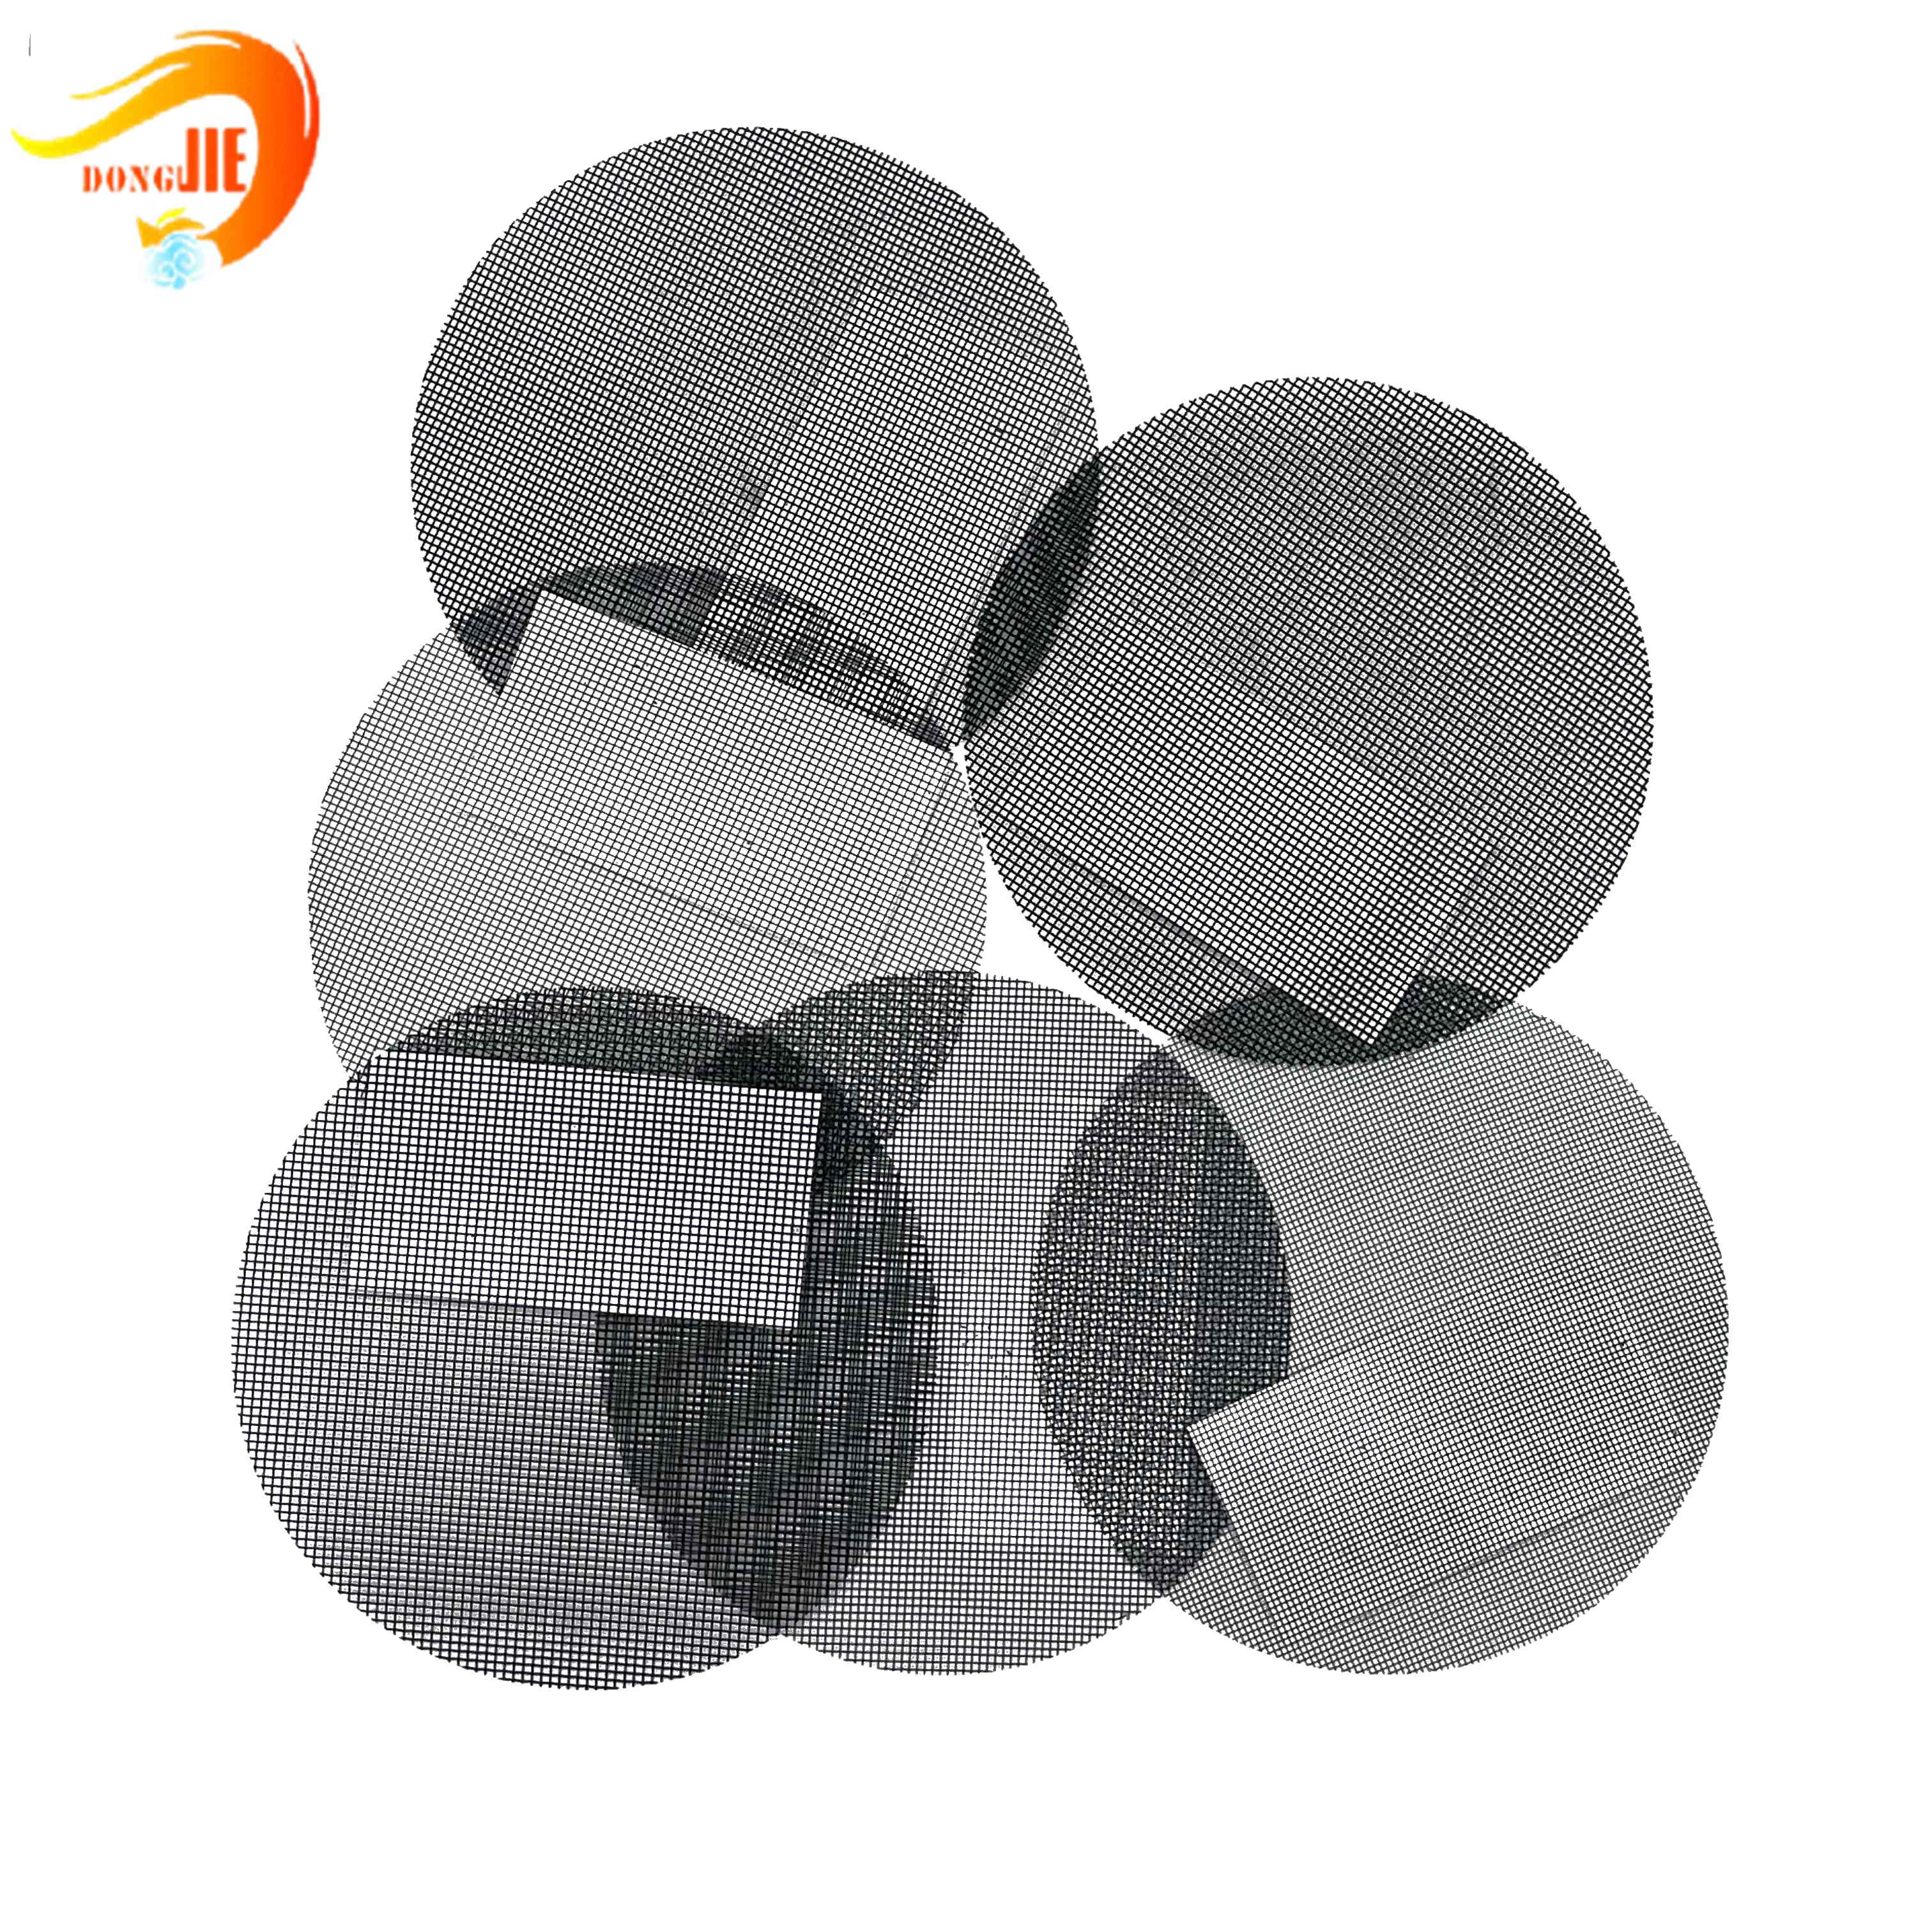 Do you know how window screens are classified?—Anping Dongjie Wire Mesh Company